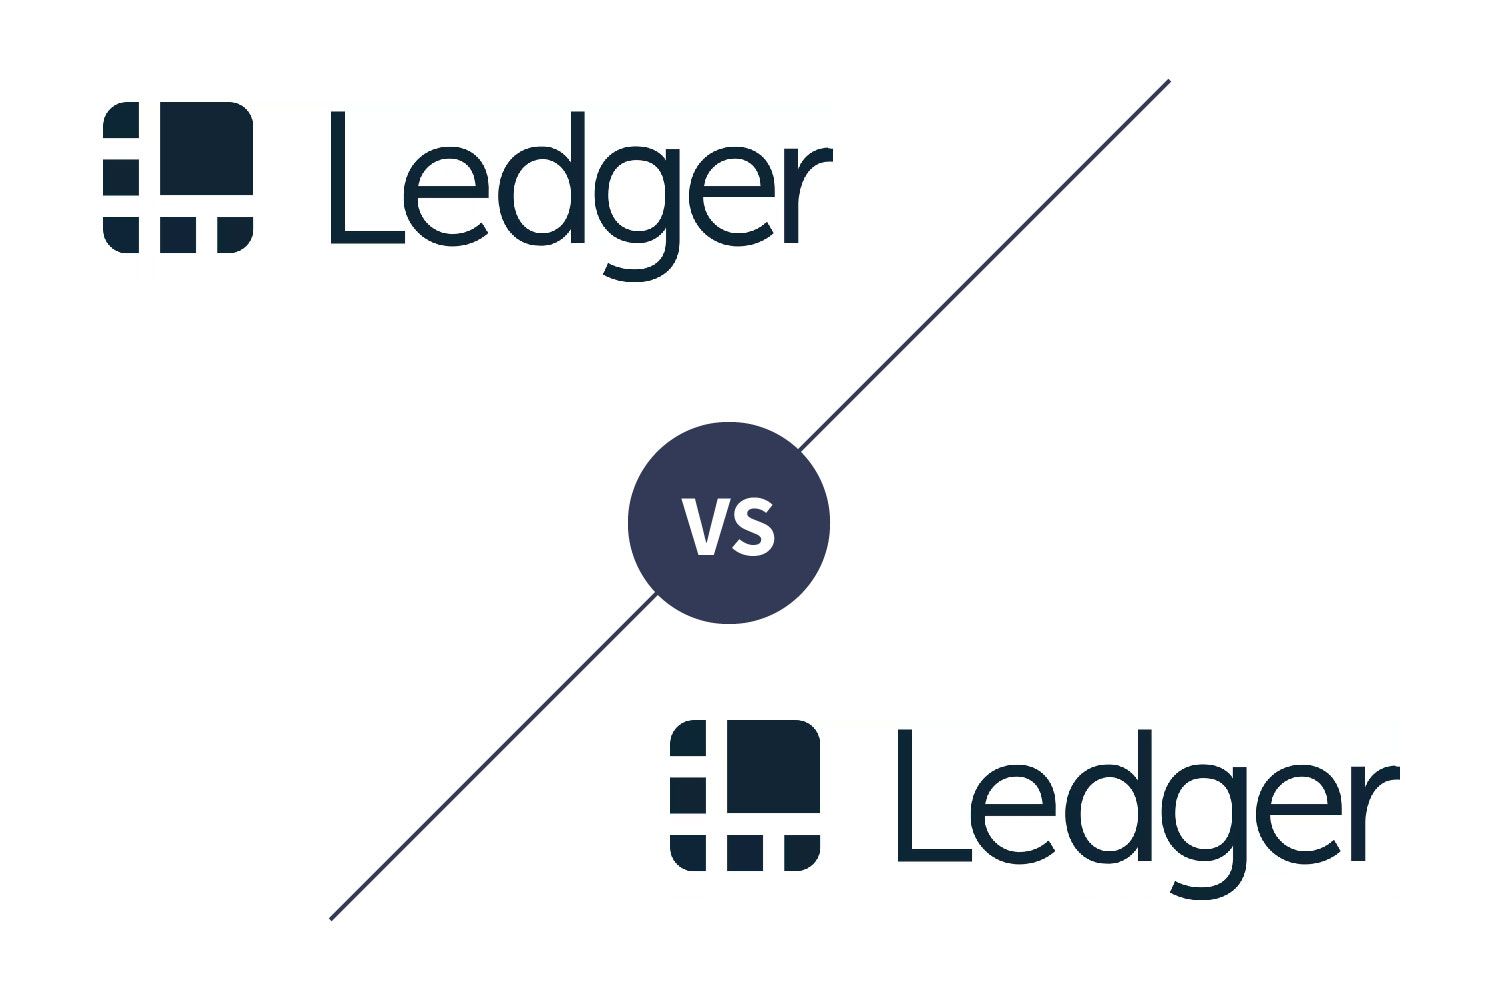 Ledger Nano X Review Everything You Need to Know